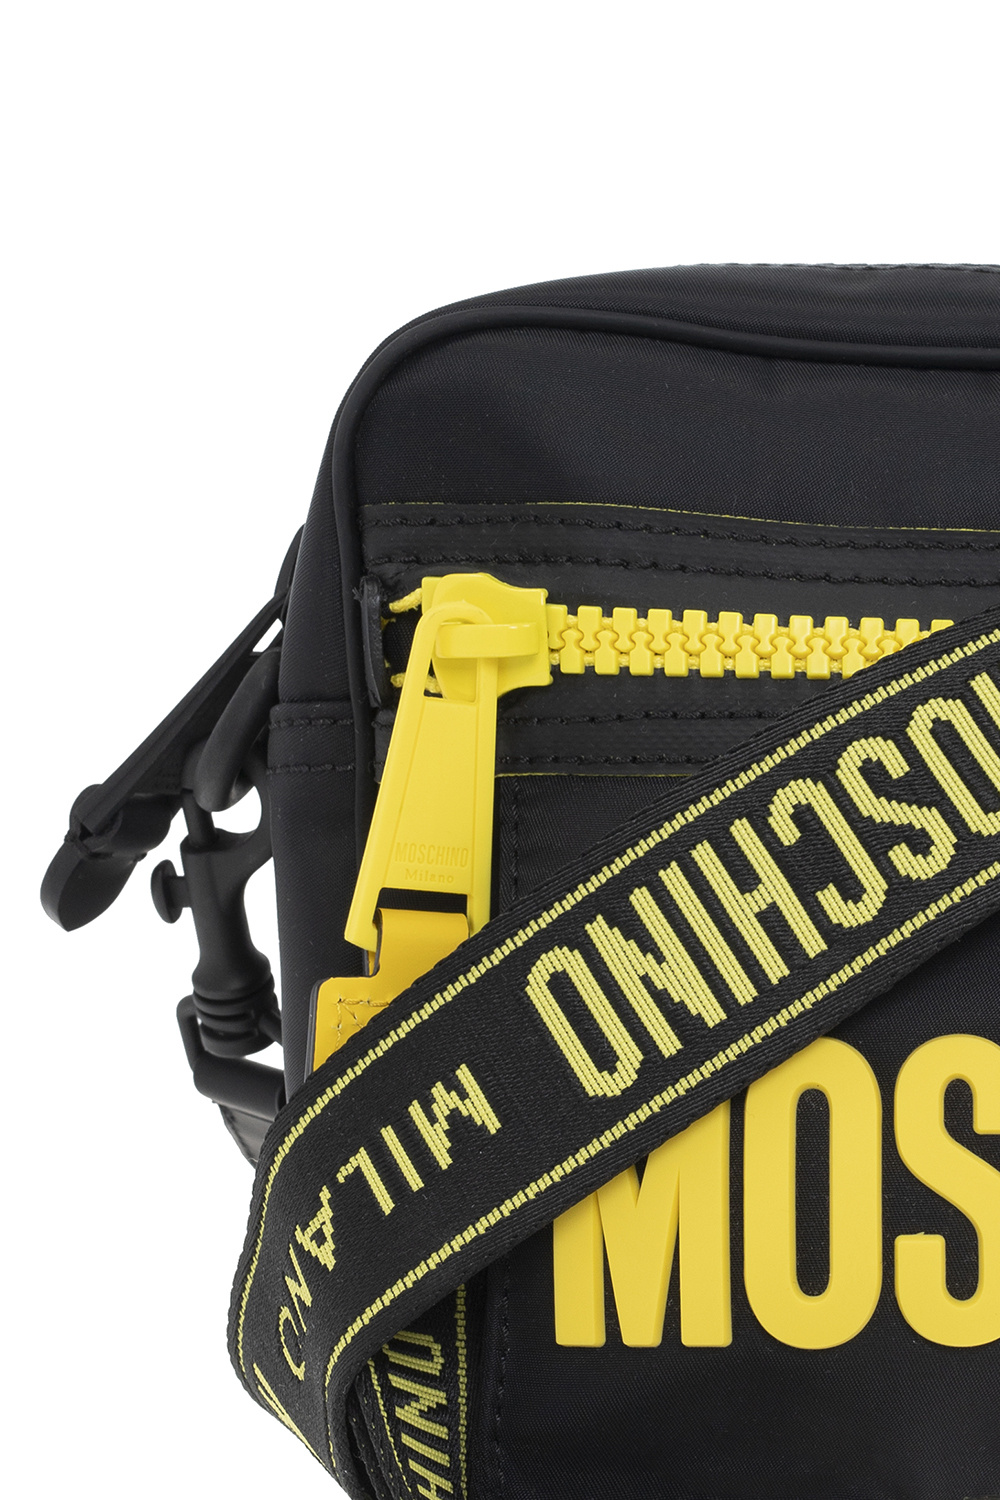 Moschino Keep your essentials organized for your busy day in the ™ Wordplay Backpack